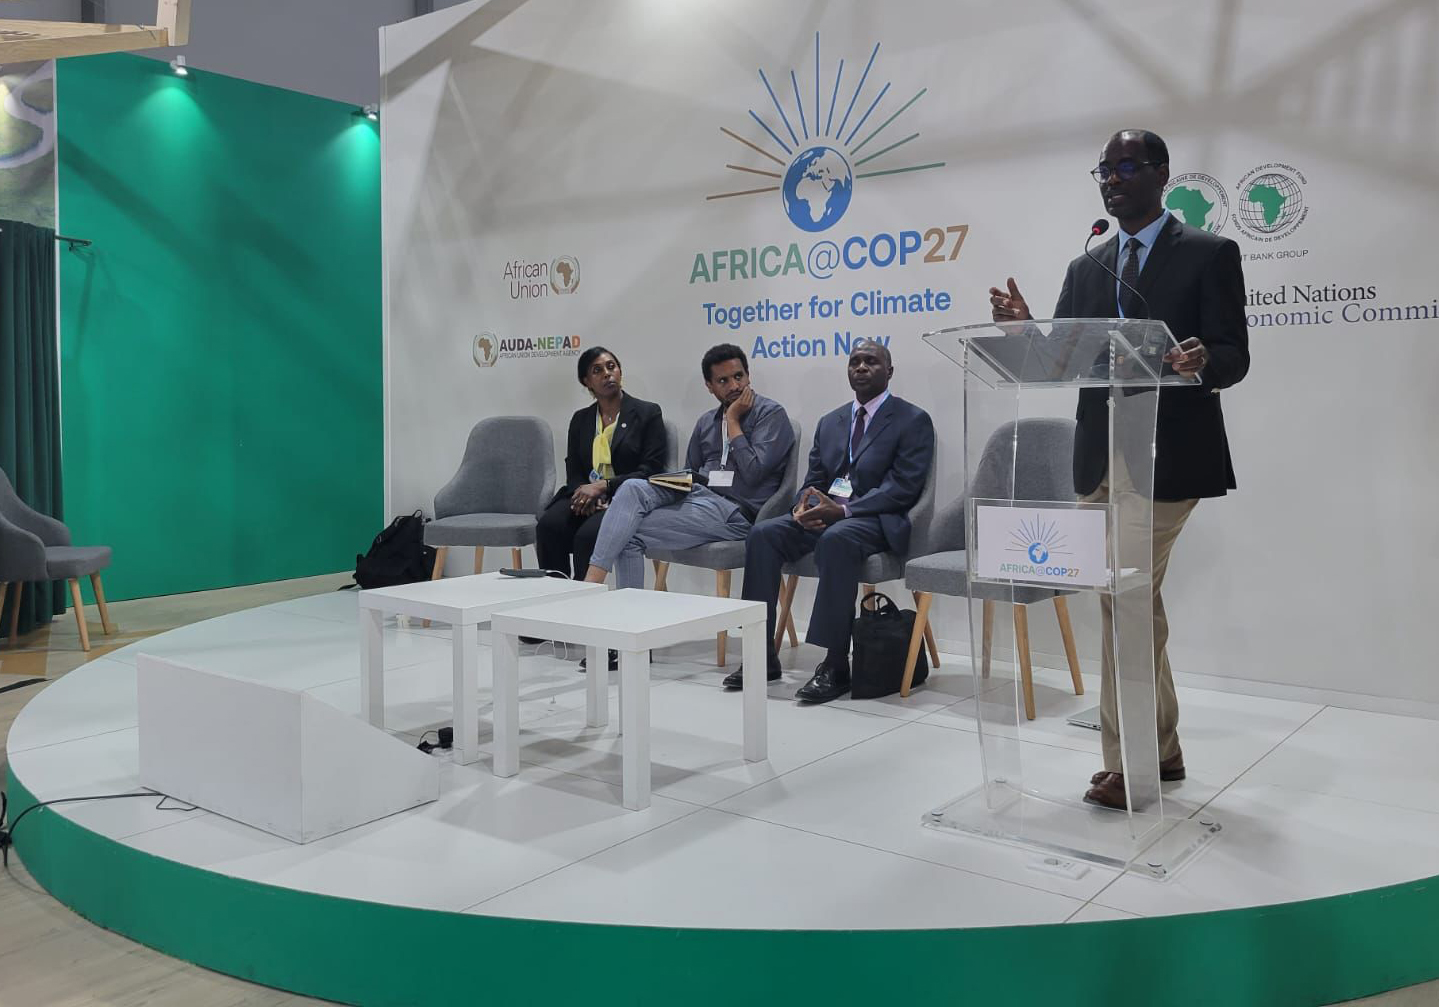 CoP27 - "Water Security for Climate Resilience in the Sahel and the Horn of Africa", November 14th, 2022